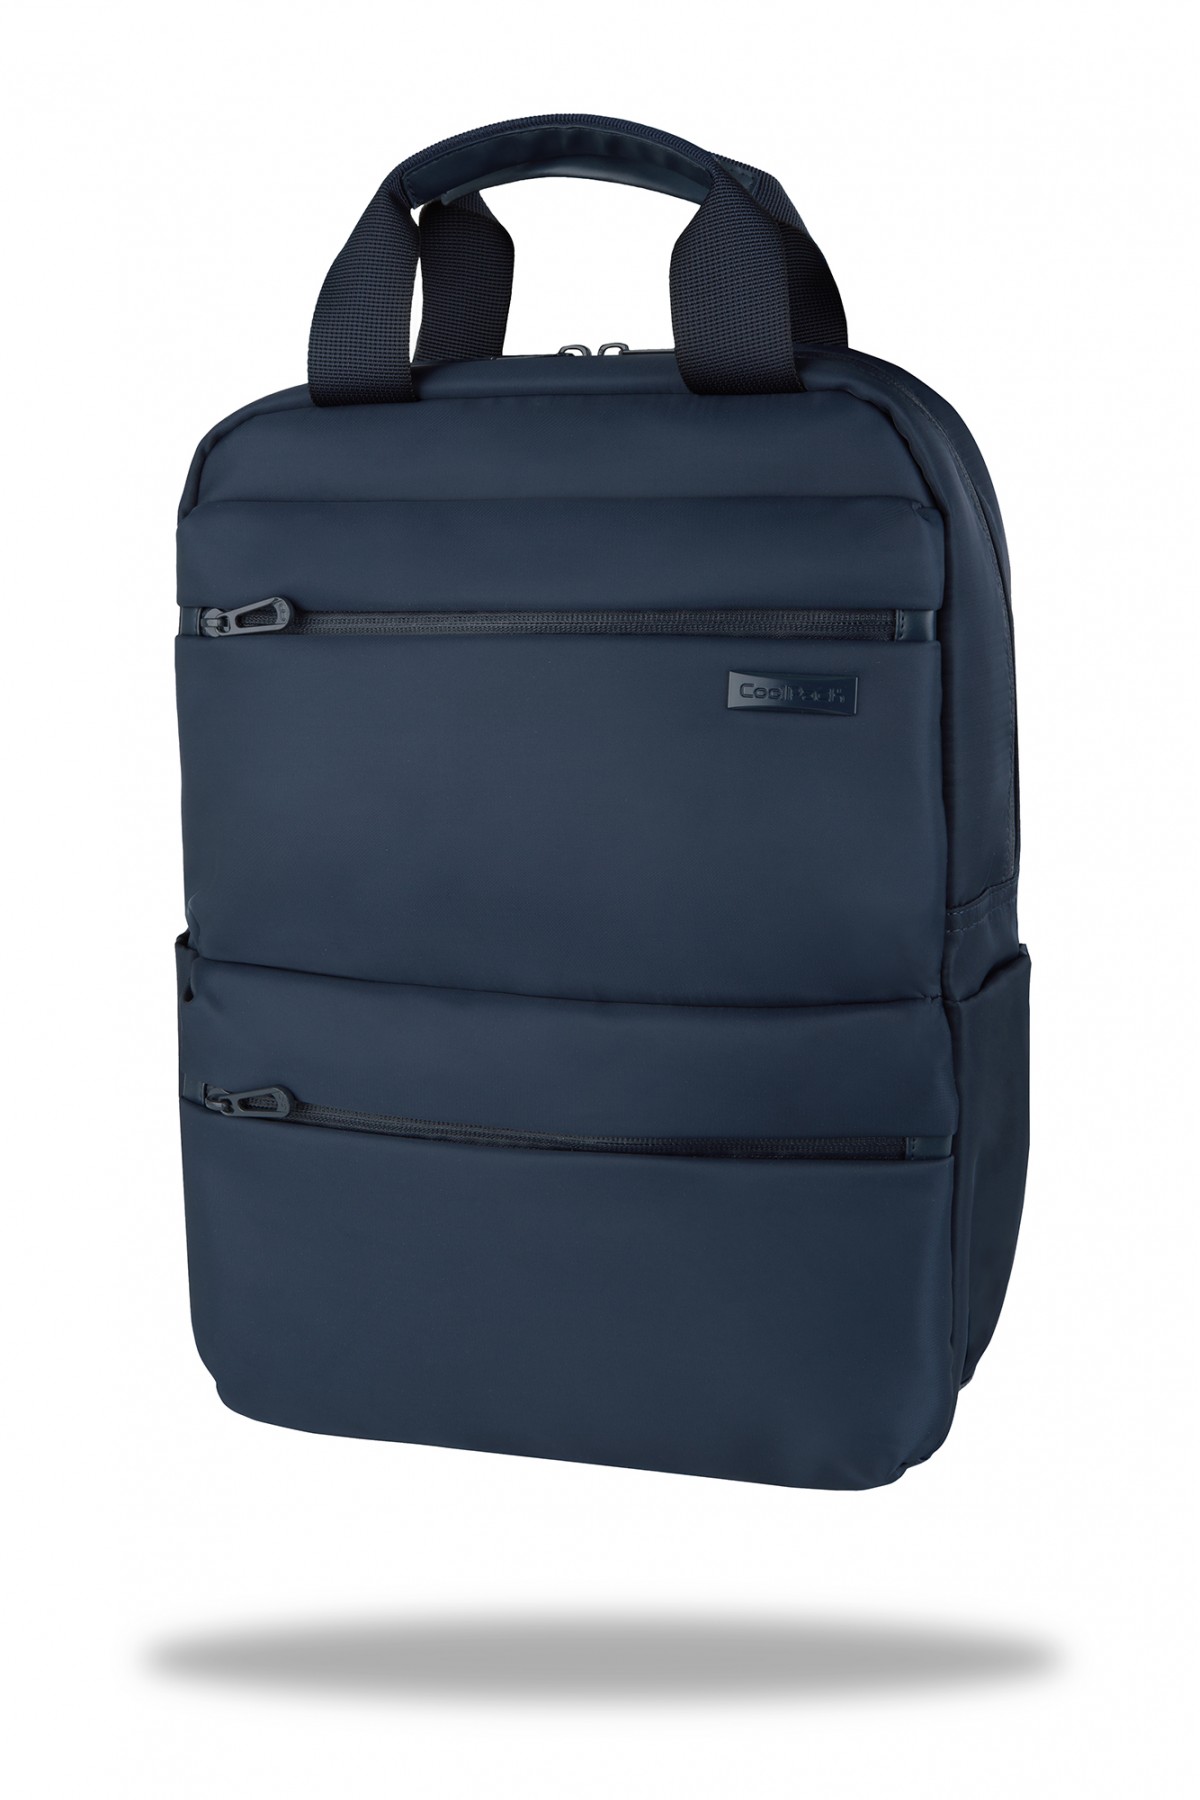 РАНЕЦ ЗА ЛАПТОП COOLPACK HOLD - NAVY BLUE